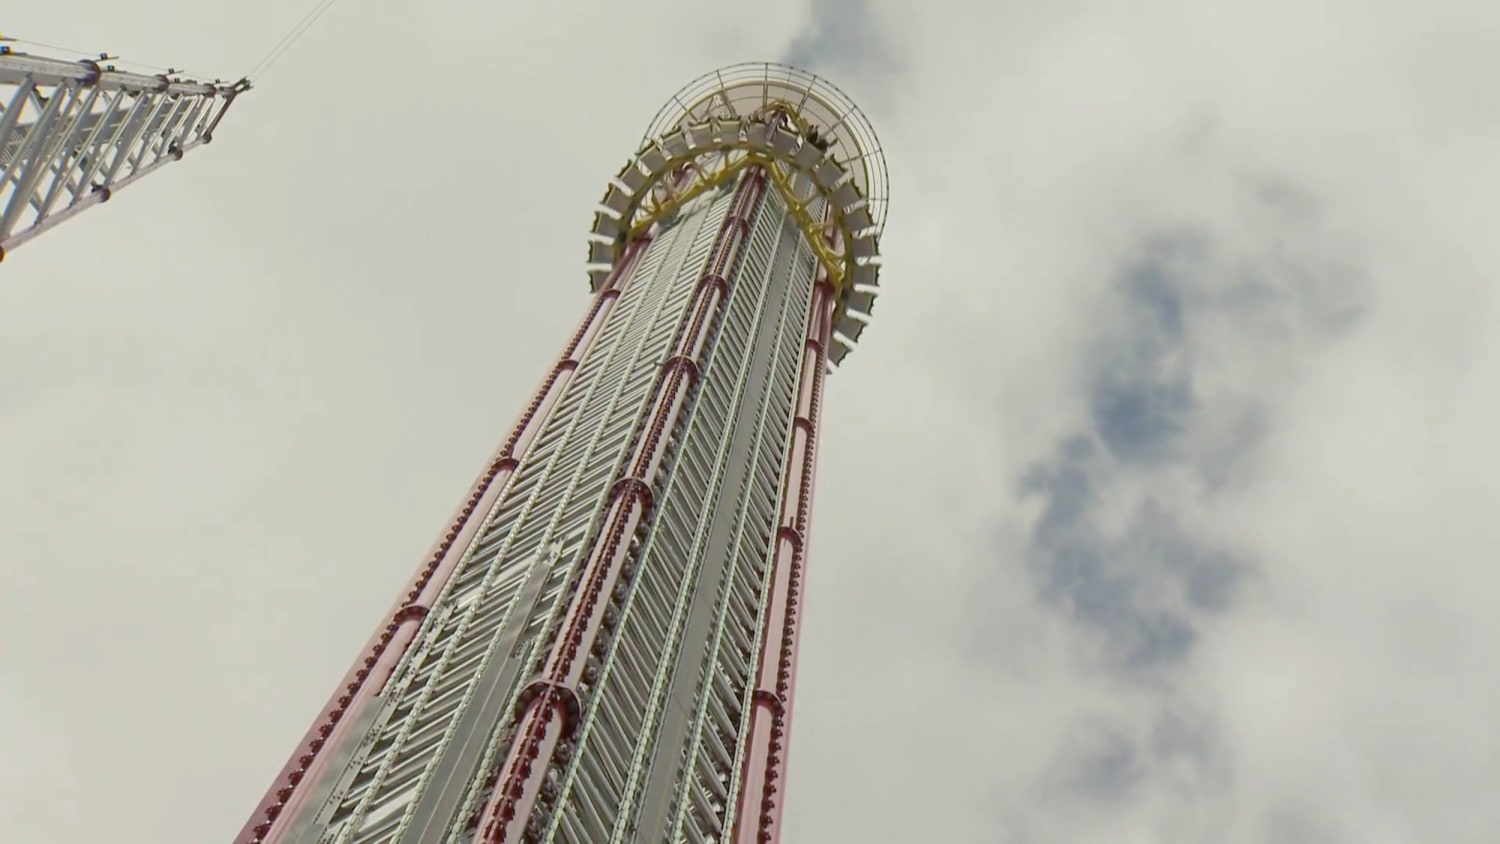 Boy, 14, Dies After Falling from 'Free Fall' Ride at Orlando's Icon Park